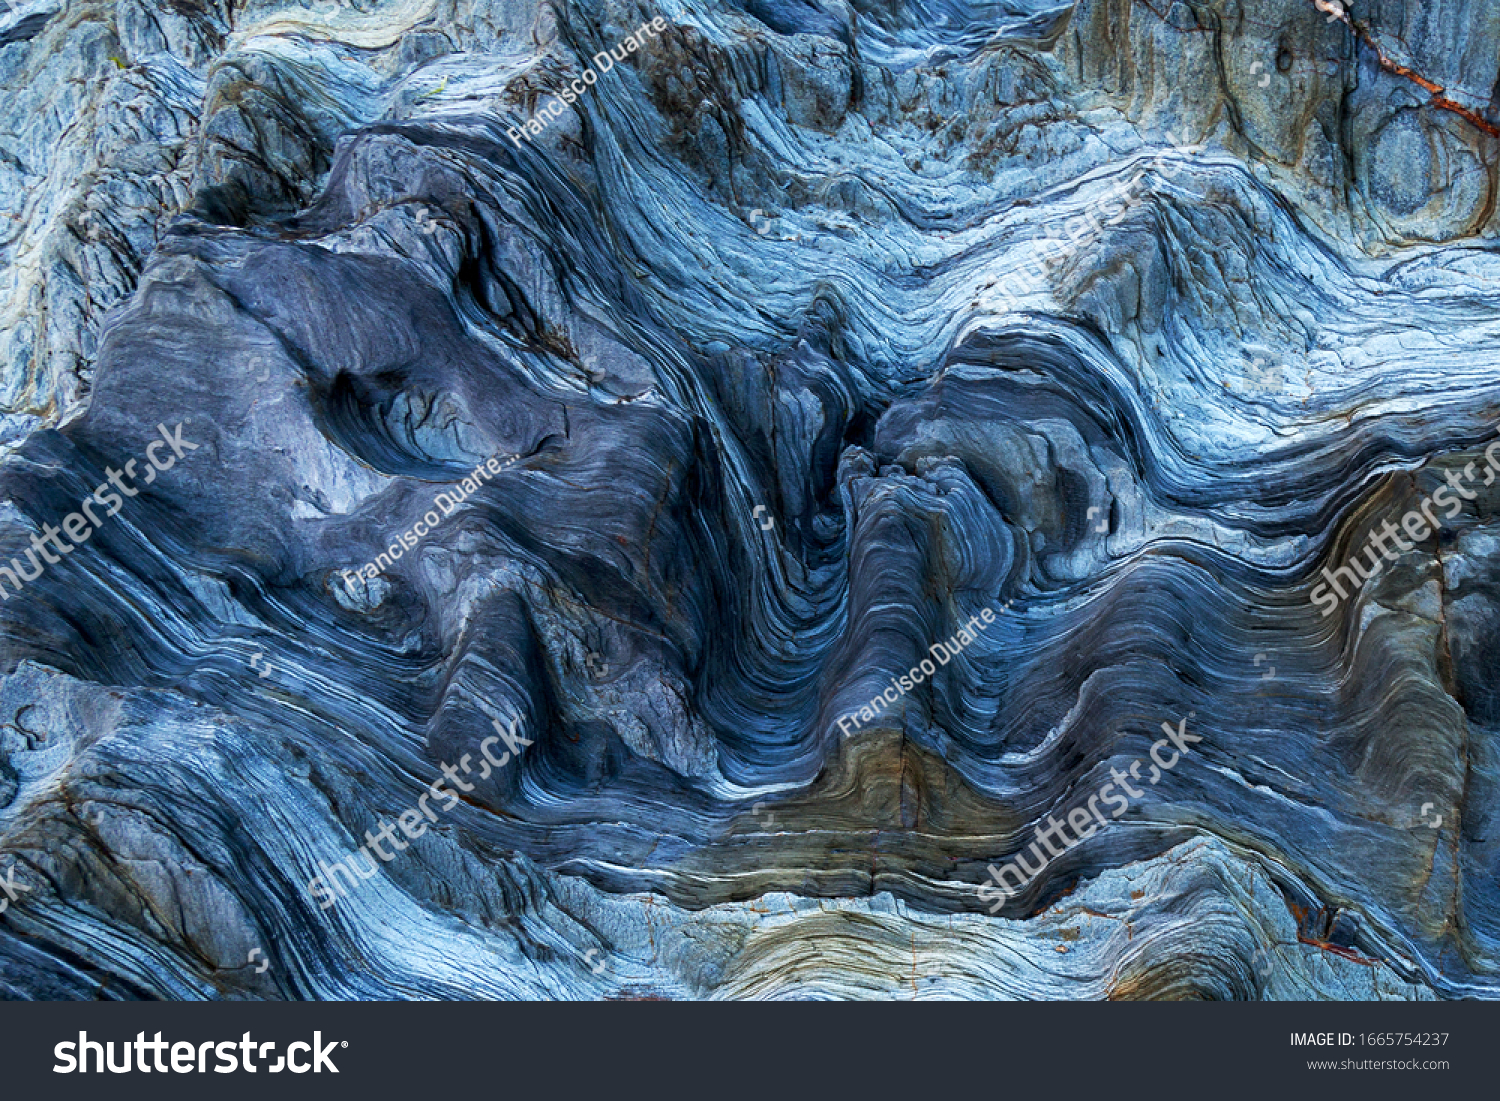 richly detailed rock with variants of blue. Rock full of curves and smooth cuts resulting from the erosive effect of sea. Close up rocks, texture dramatic and colorful erosional water formation. Stone #1665754237